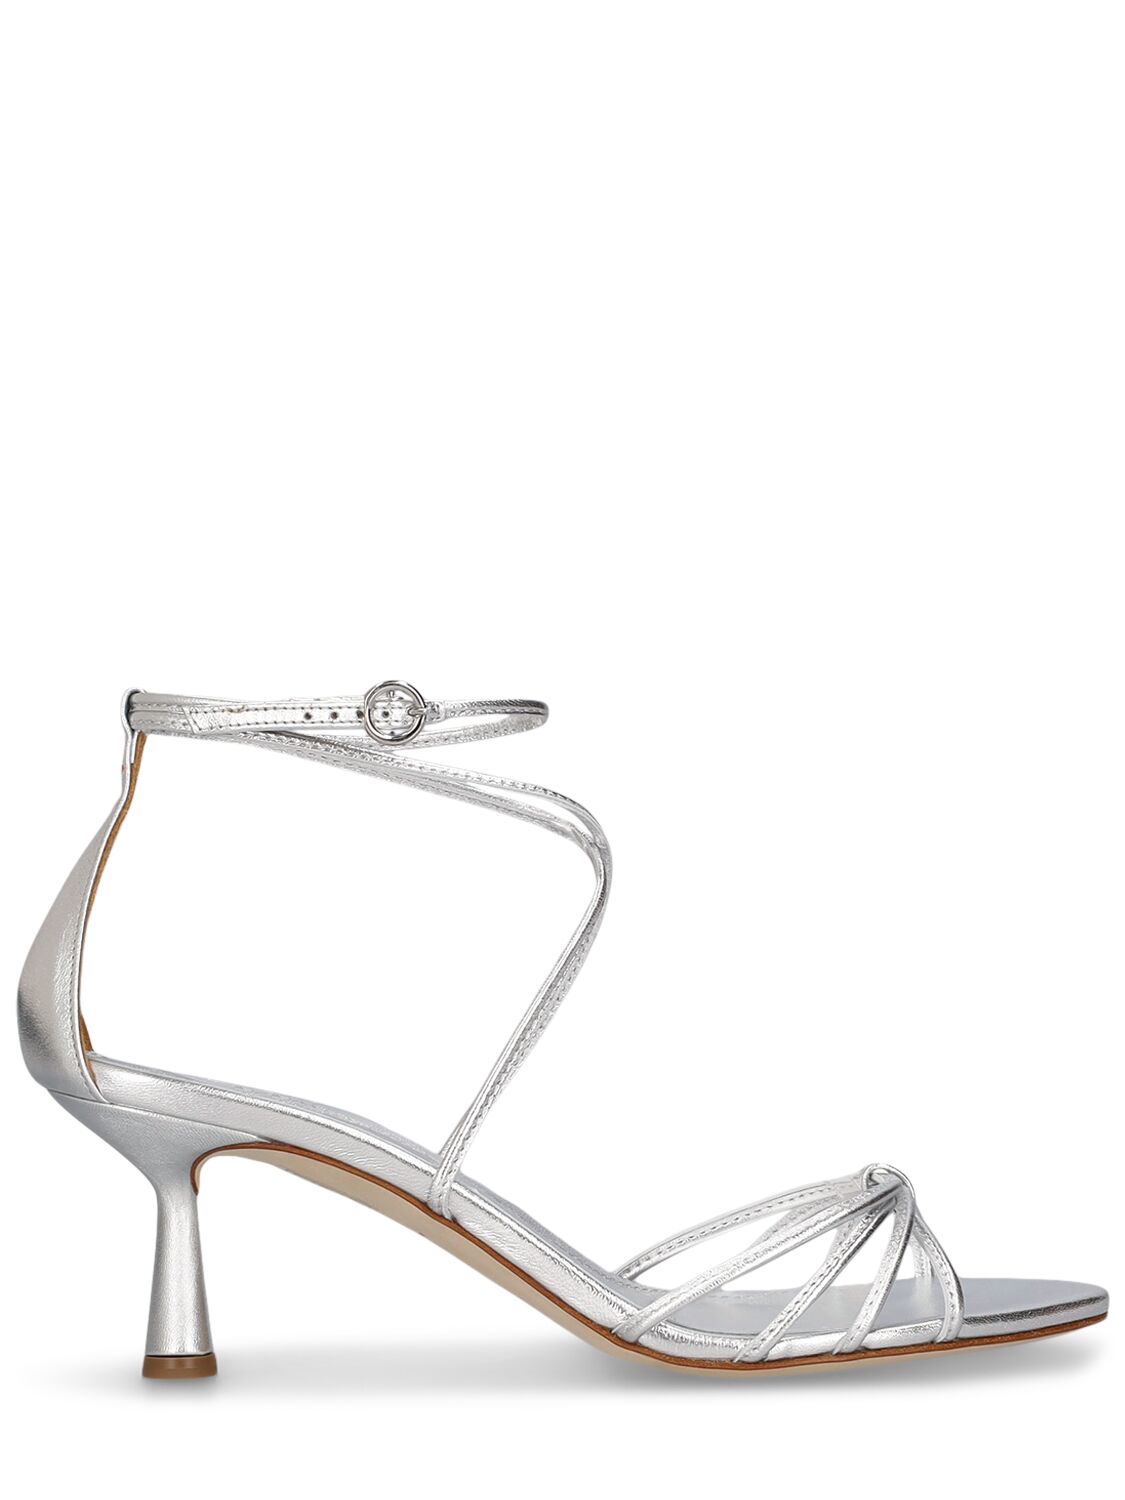 Aeyde 65mm Luella Laminated Leather Sandals In Silver